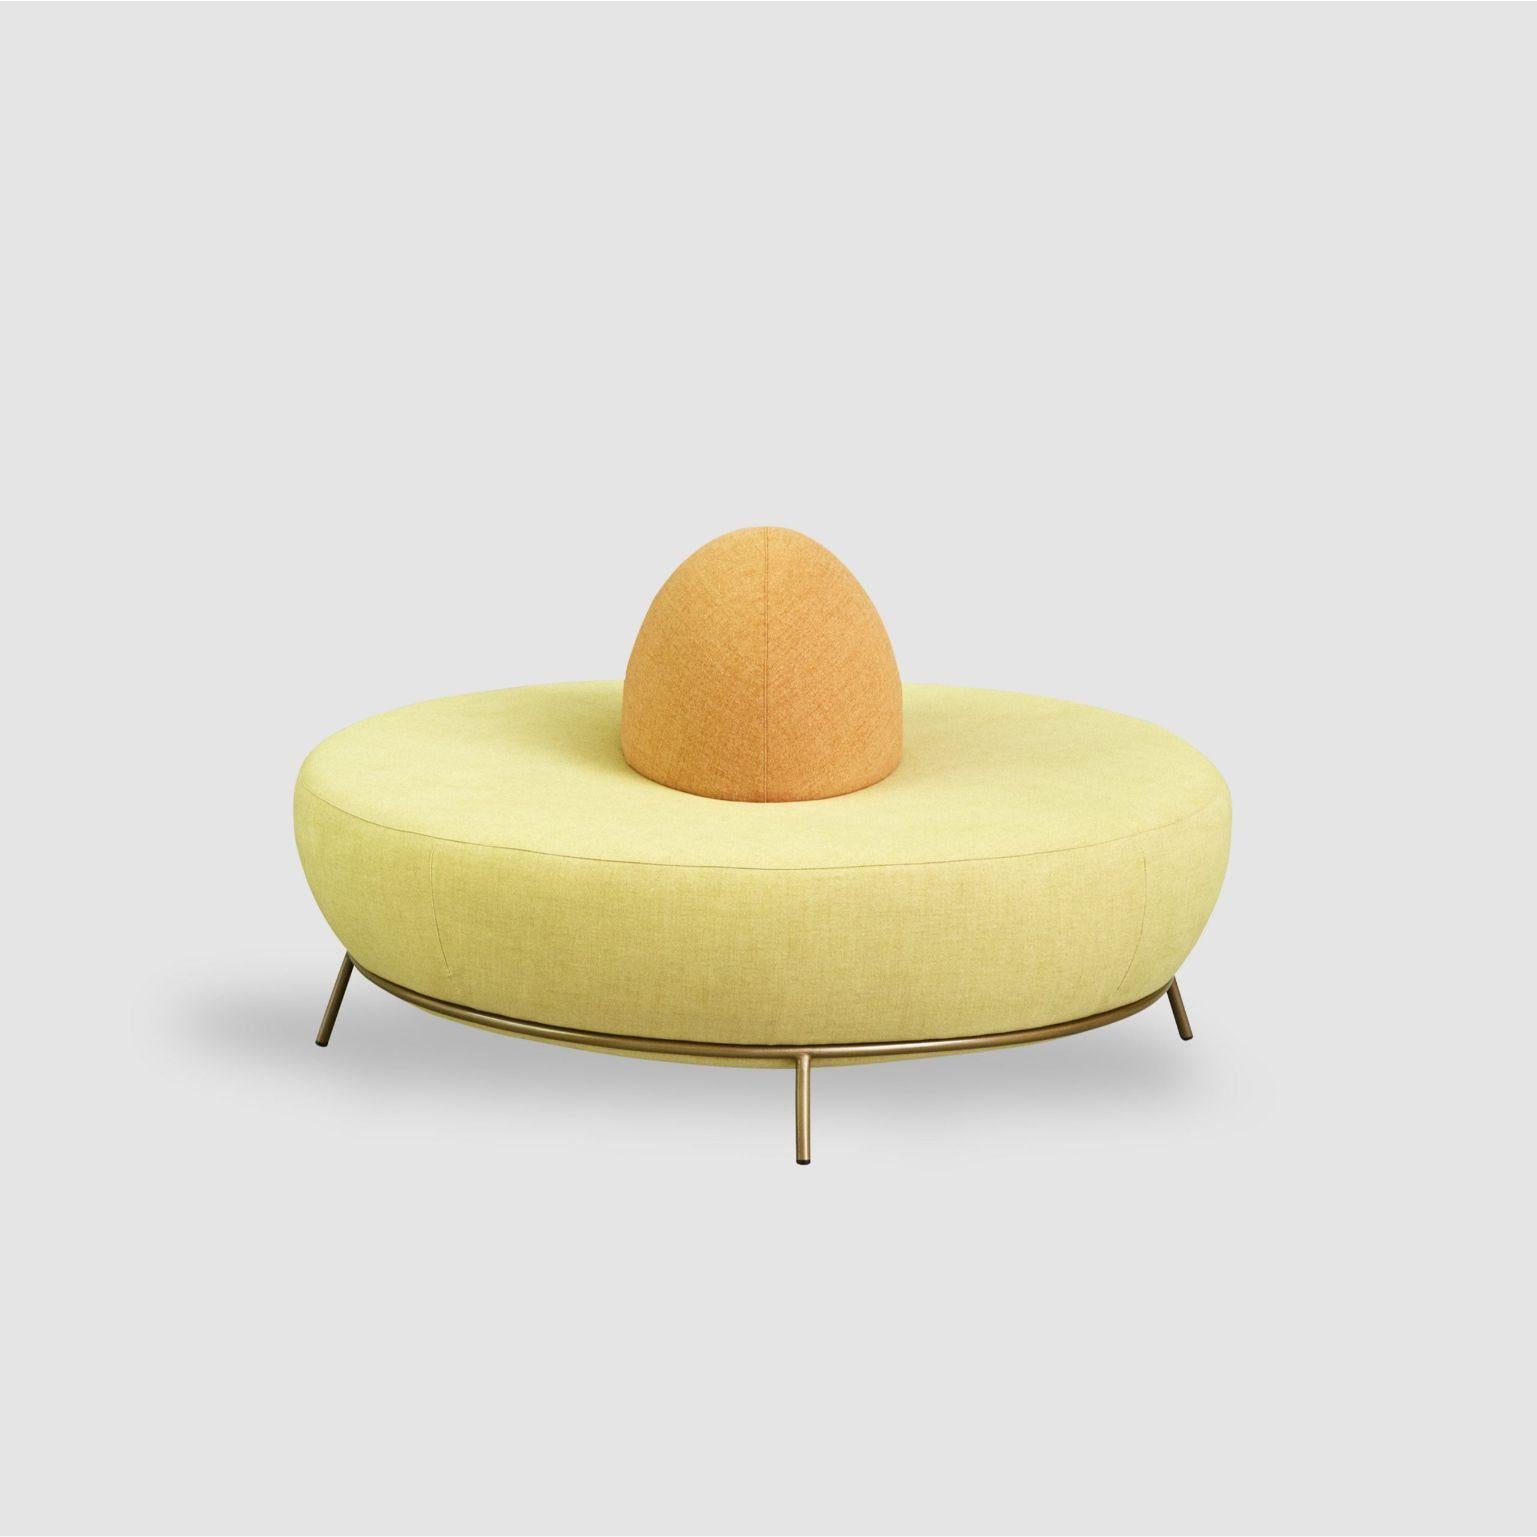 Nest round sofa with backrest by Paula Rosales
Dimensions: W140, D140, H80, Seat42
Materials: Iron structure and MDF board
Foam CMHR (high resilience and flame retardant) for all our cushion filling systems
Painted or chromed legs
Stainless